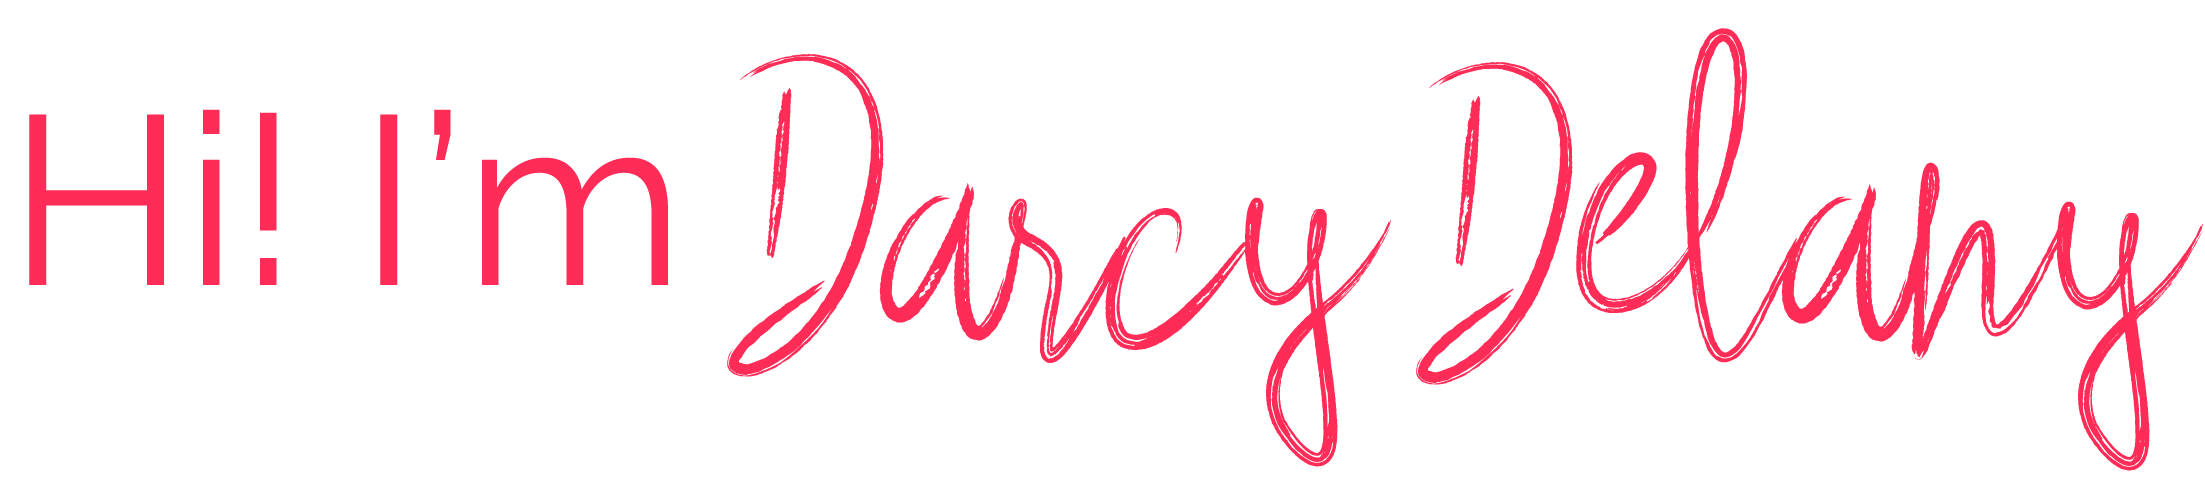 Stories with Sass | Darcy Delany | Author | Writer | Authorpreneur | Entrepreneur | Business | Coaching